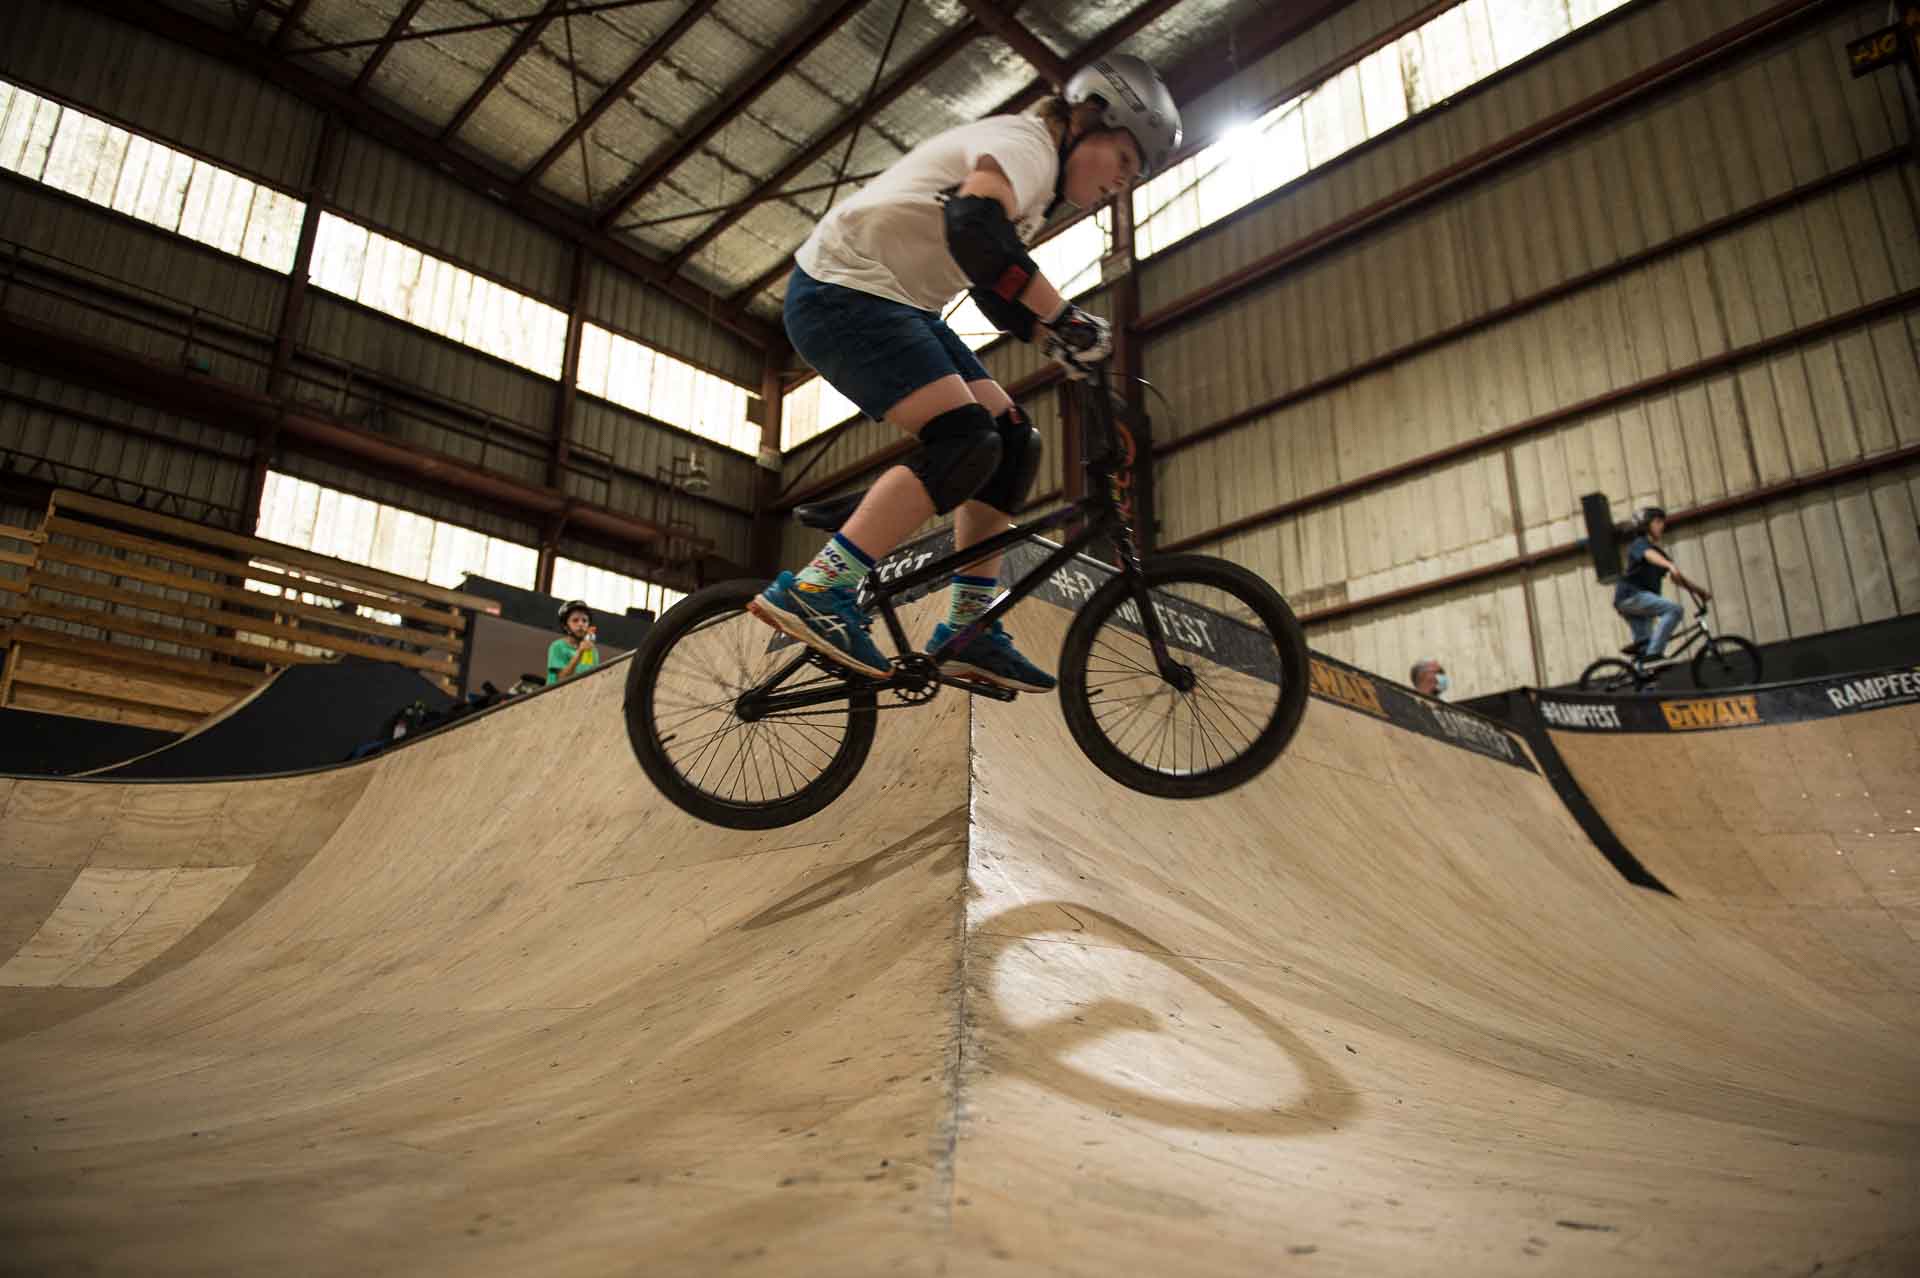 BMX student Zach Hutton jumps the hip in the bowl at Rampfest Indoor Skatepark